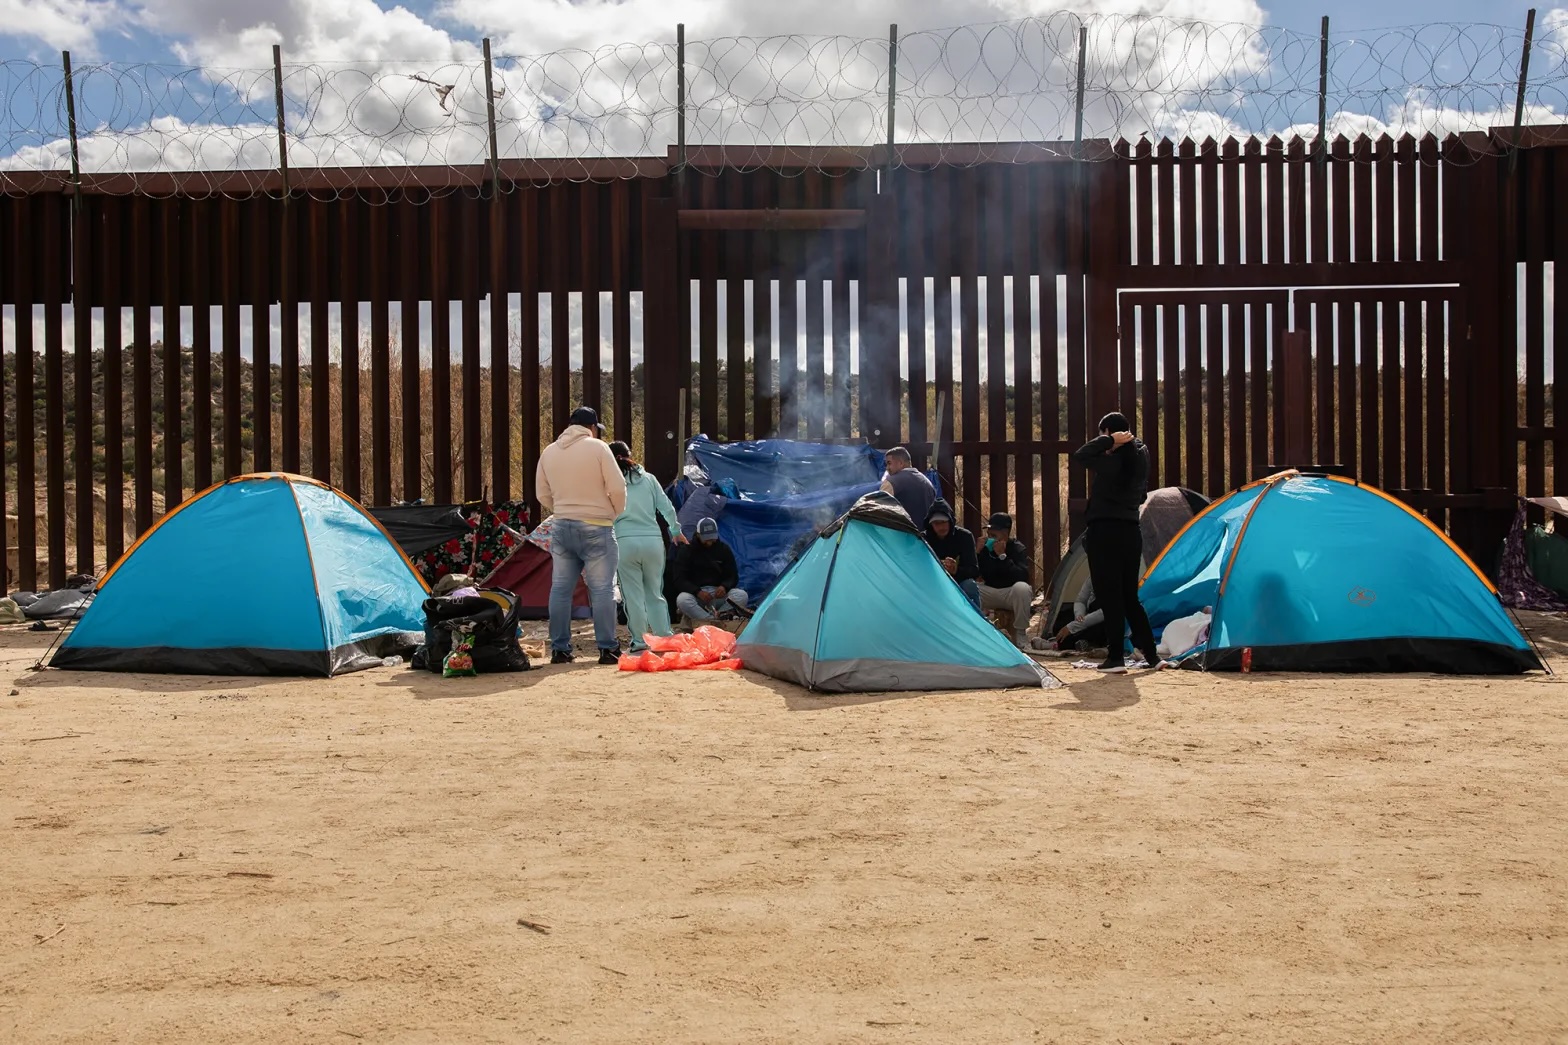 Migrant tents beside a border wall with some people standing and seated between the tents.